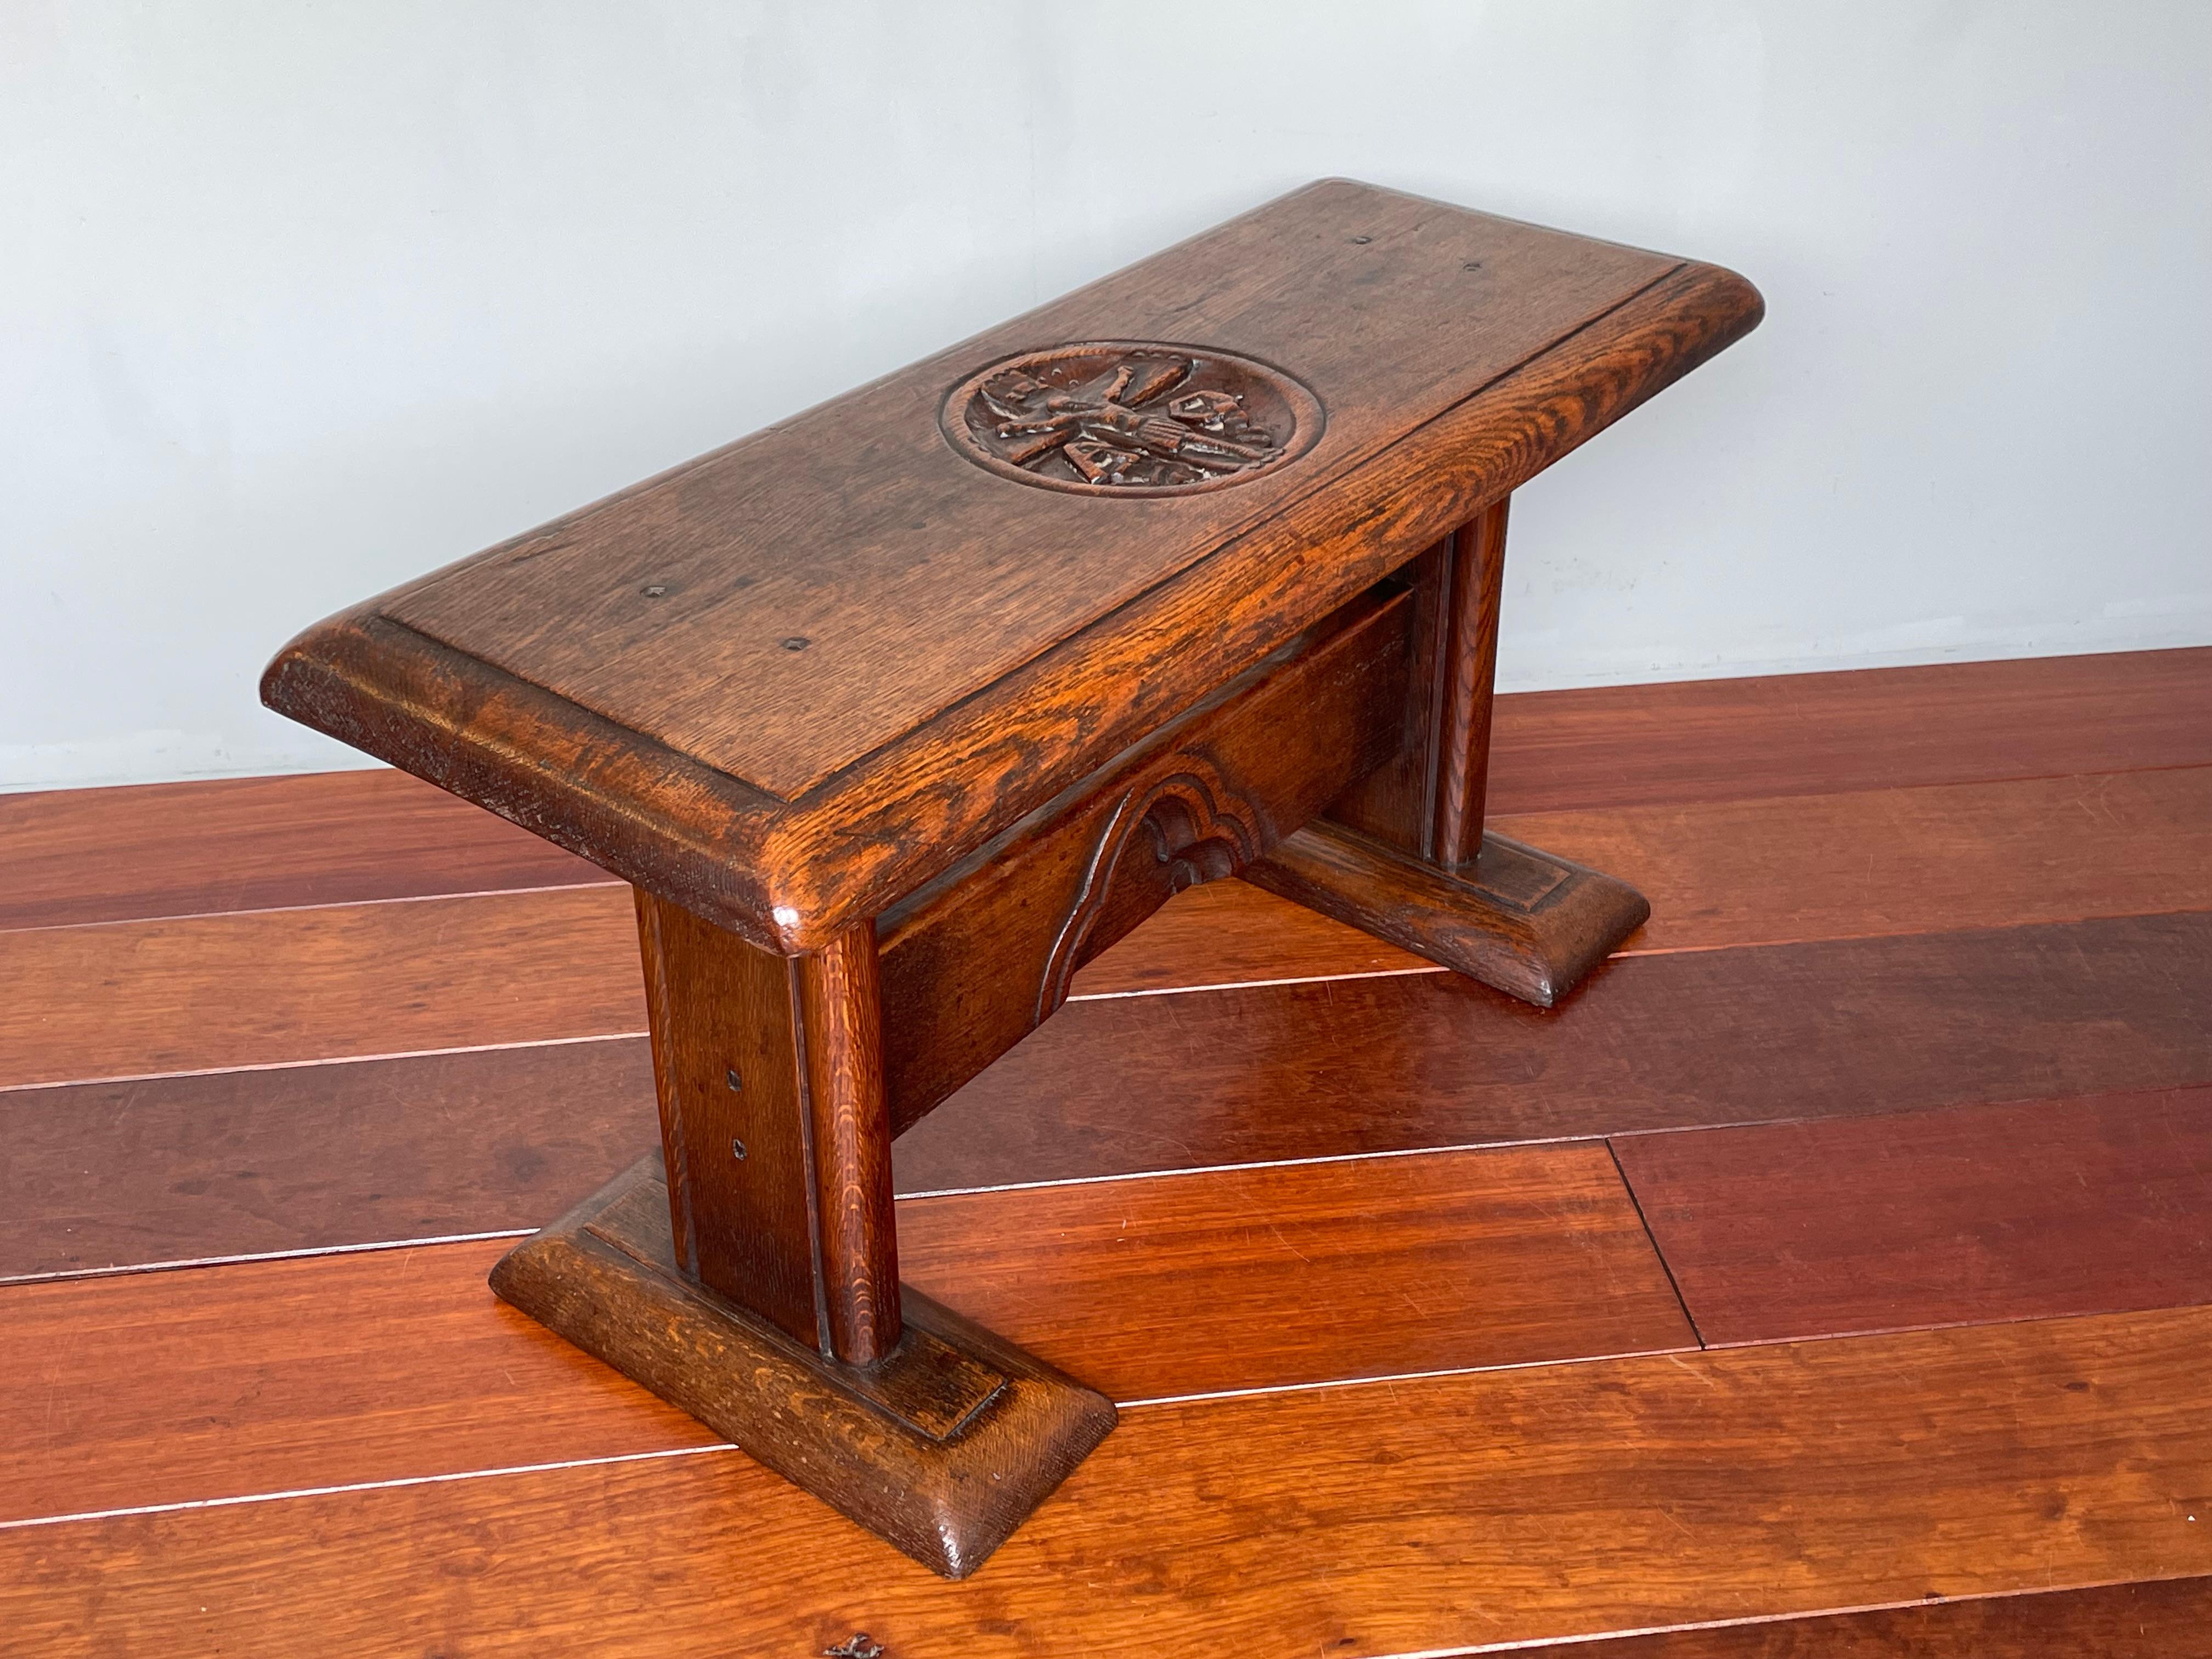 Oak Gothic Revival Stool / Bench with Hand Carved Christ on Crucifix Sculpture 1800s For Sale